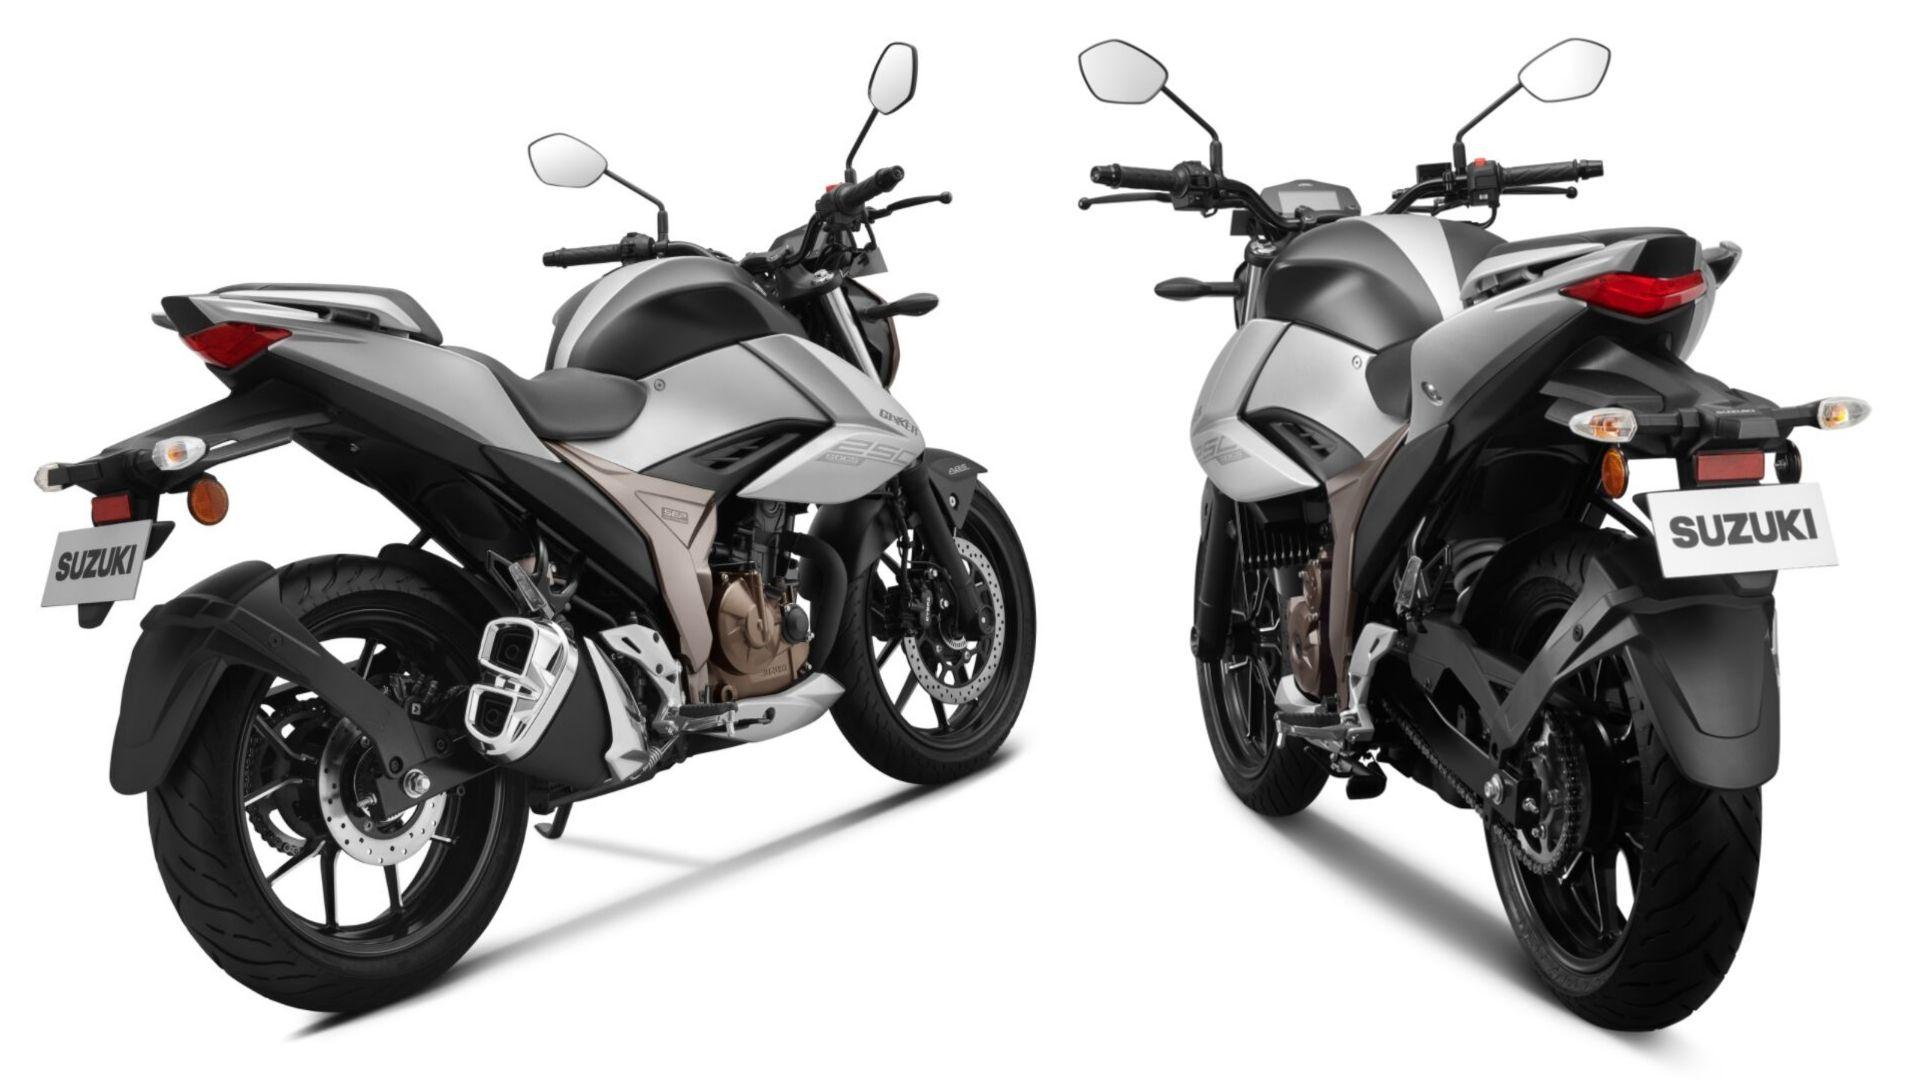 Suzuki Gixxer 250 (Naked) Launched In India, Priced At